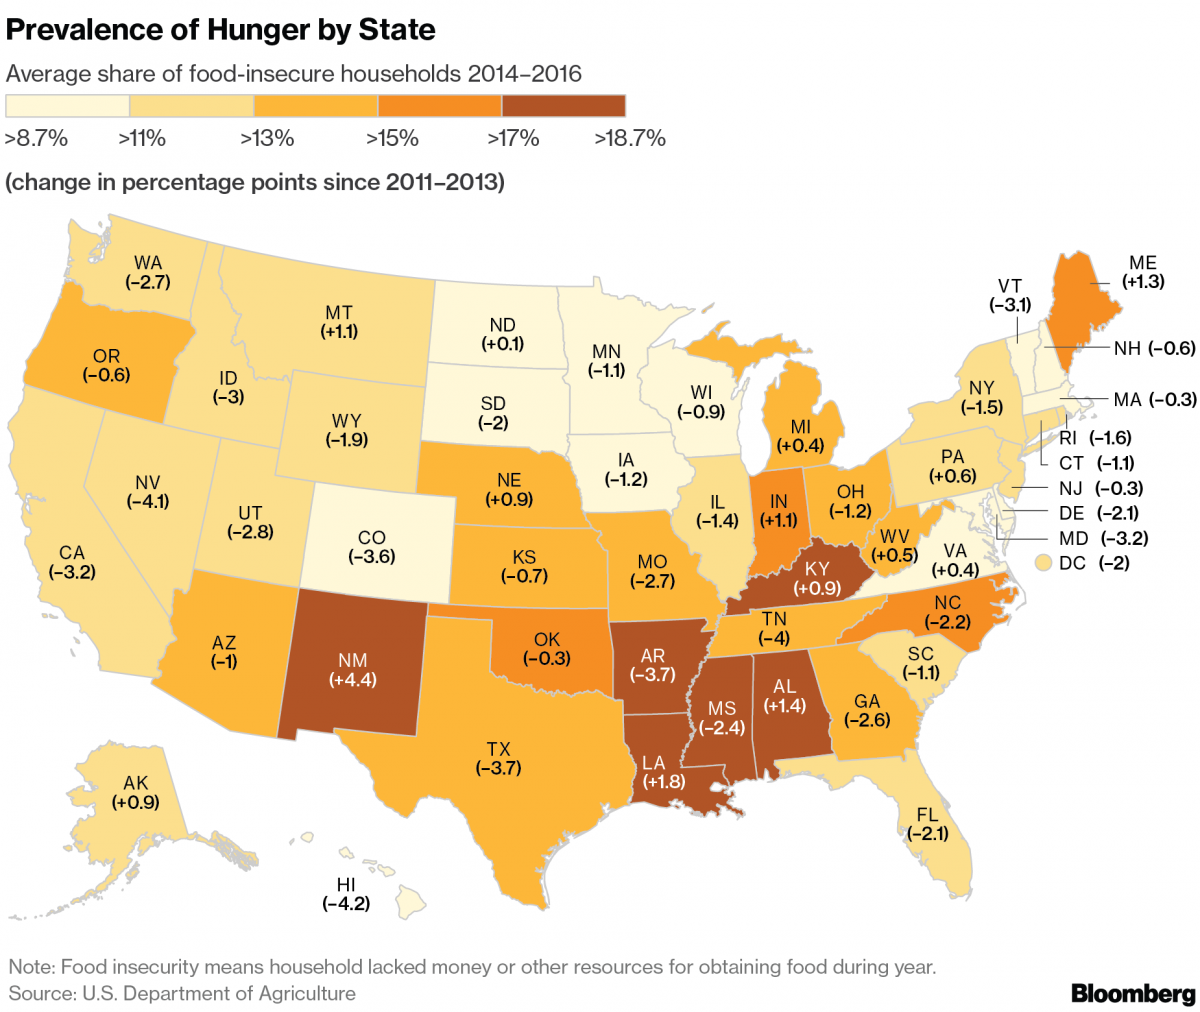 Report: Hunger in U.S. Drops to Lowest in a Decade